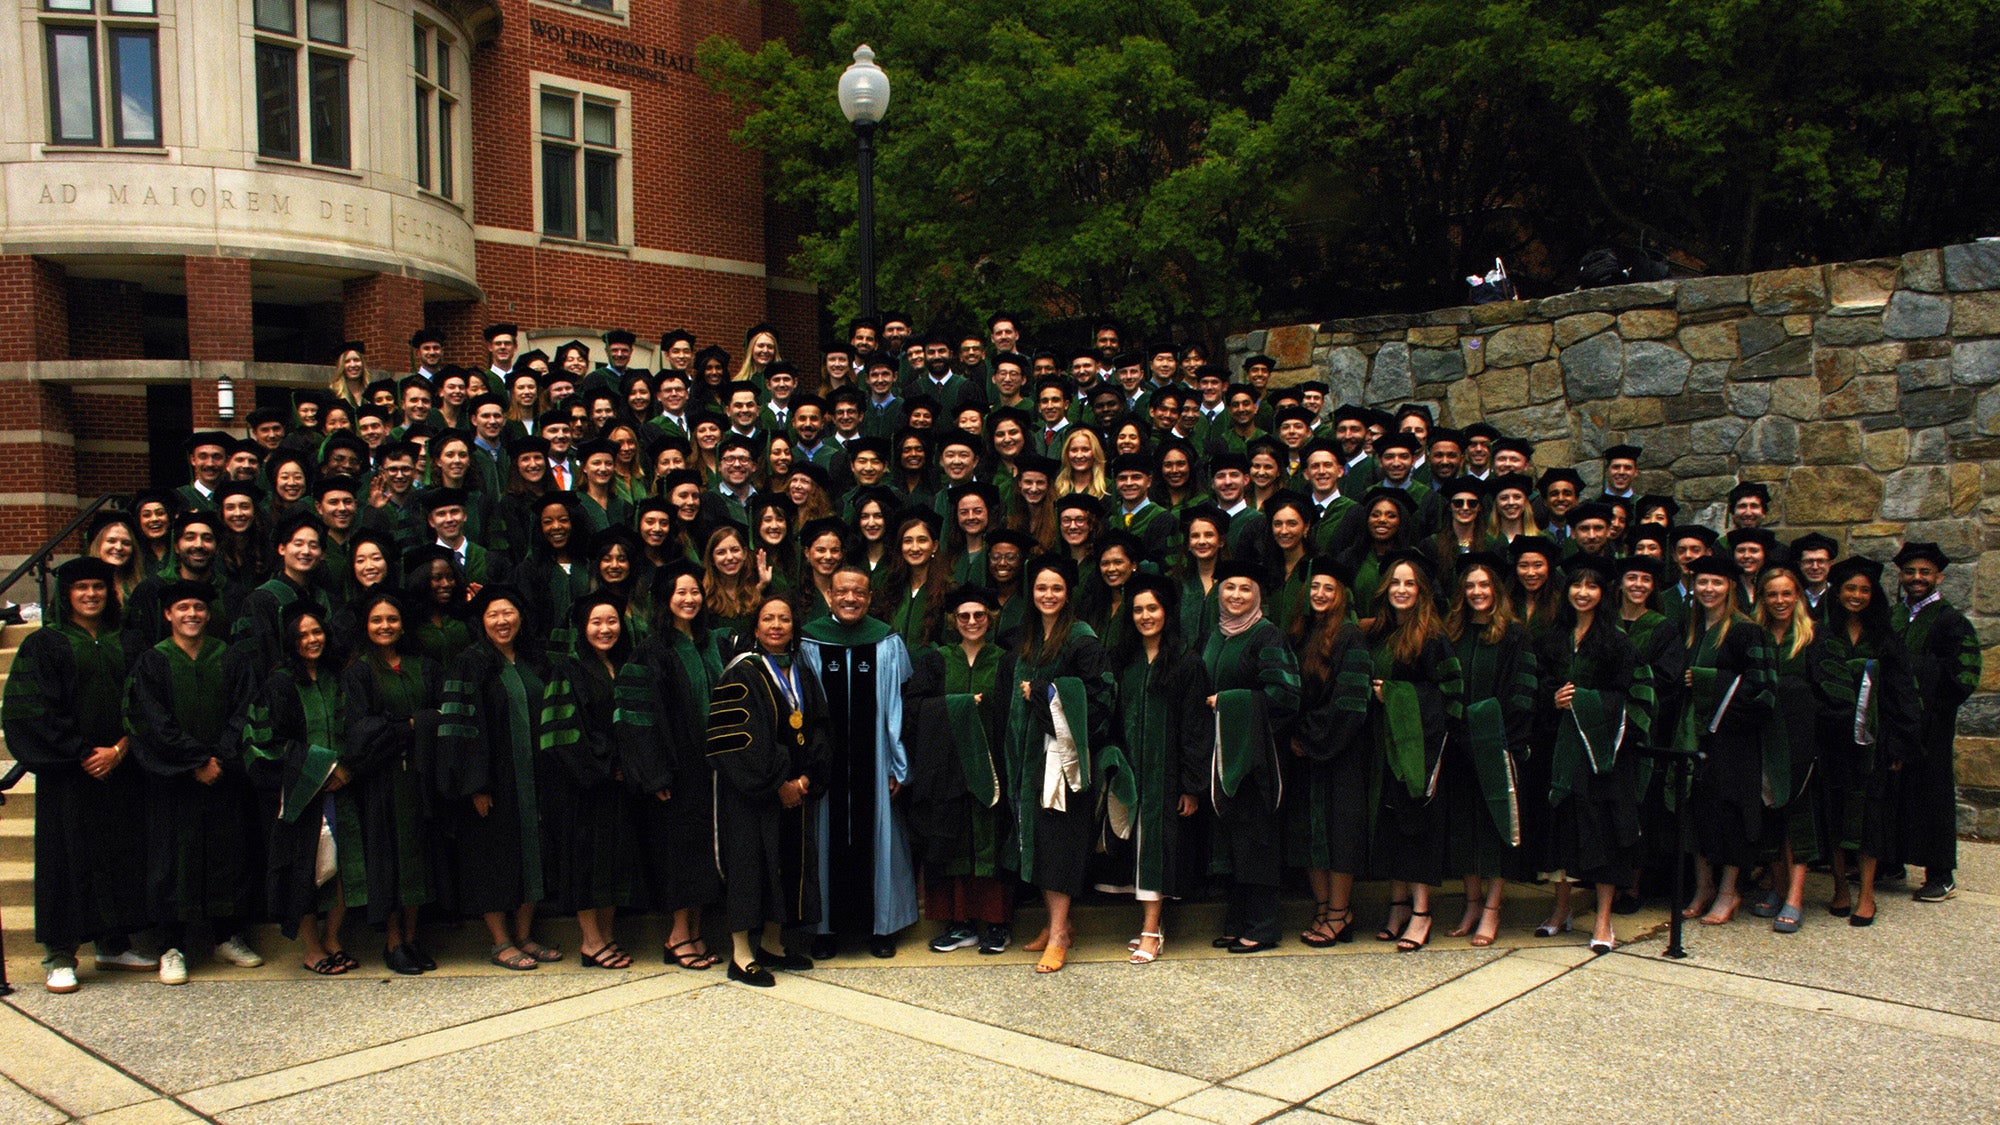 The class of 2024 stands together as a group dressed in academic regalia outside Wolfington Hall on campus